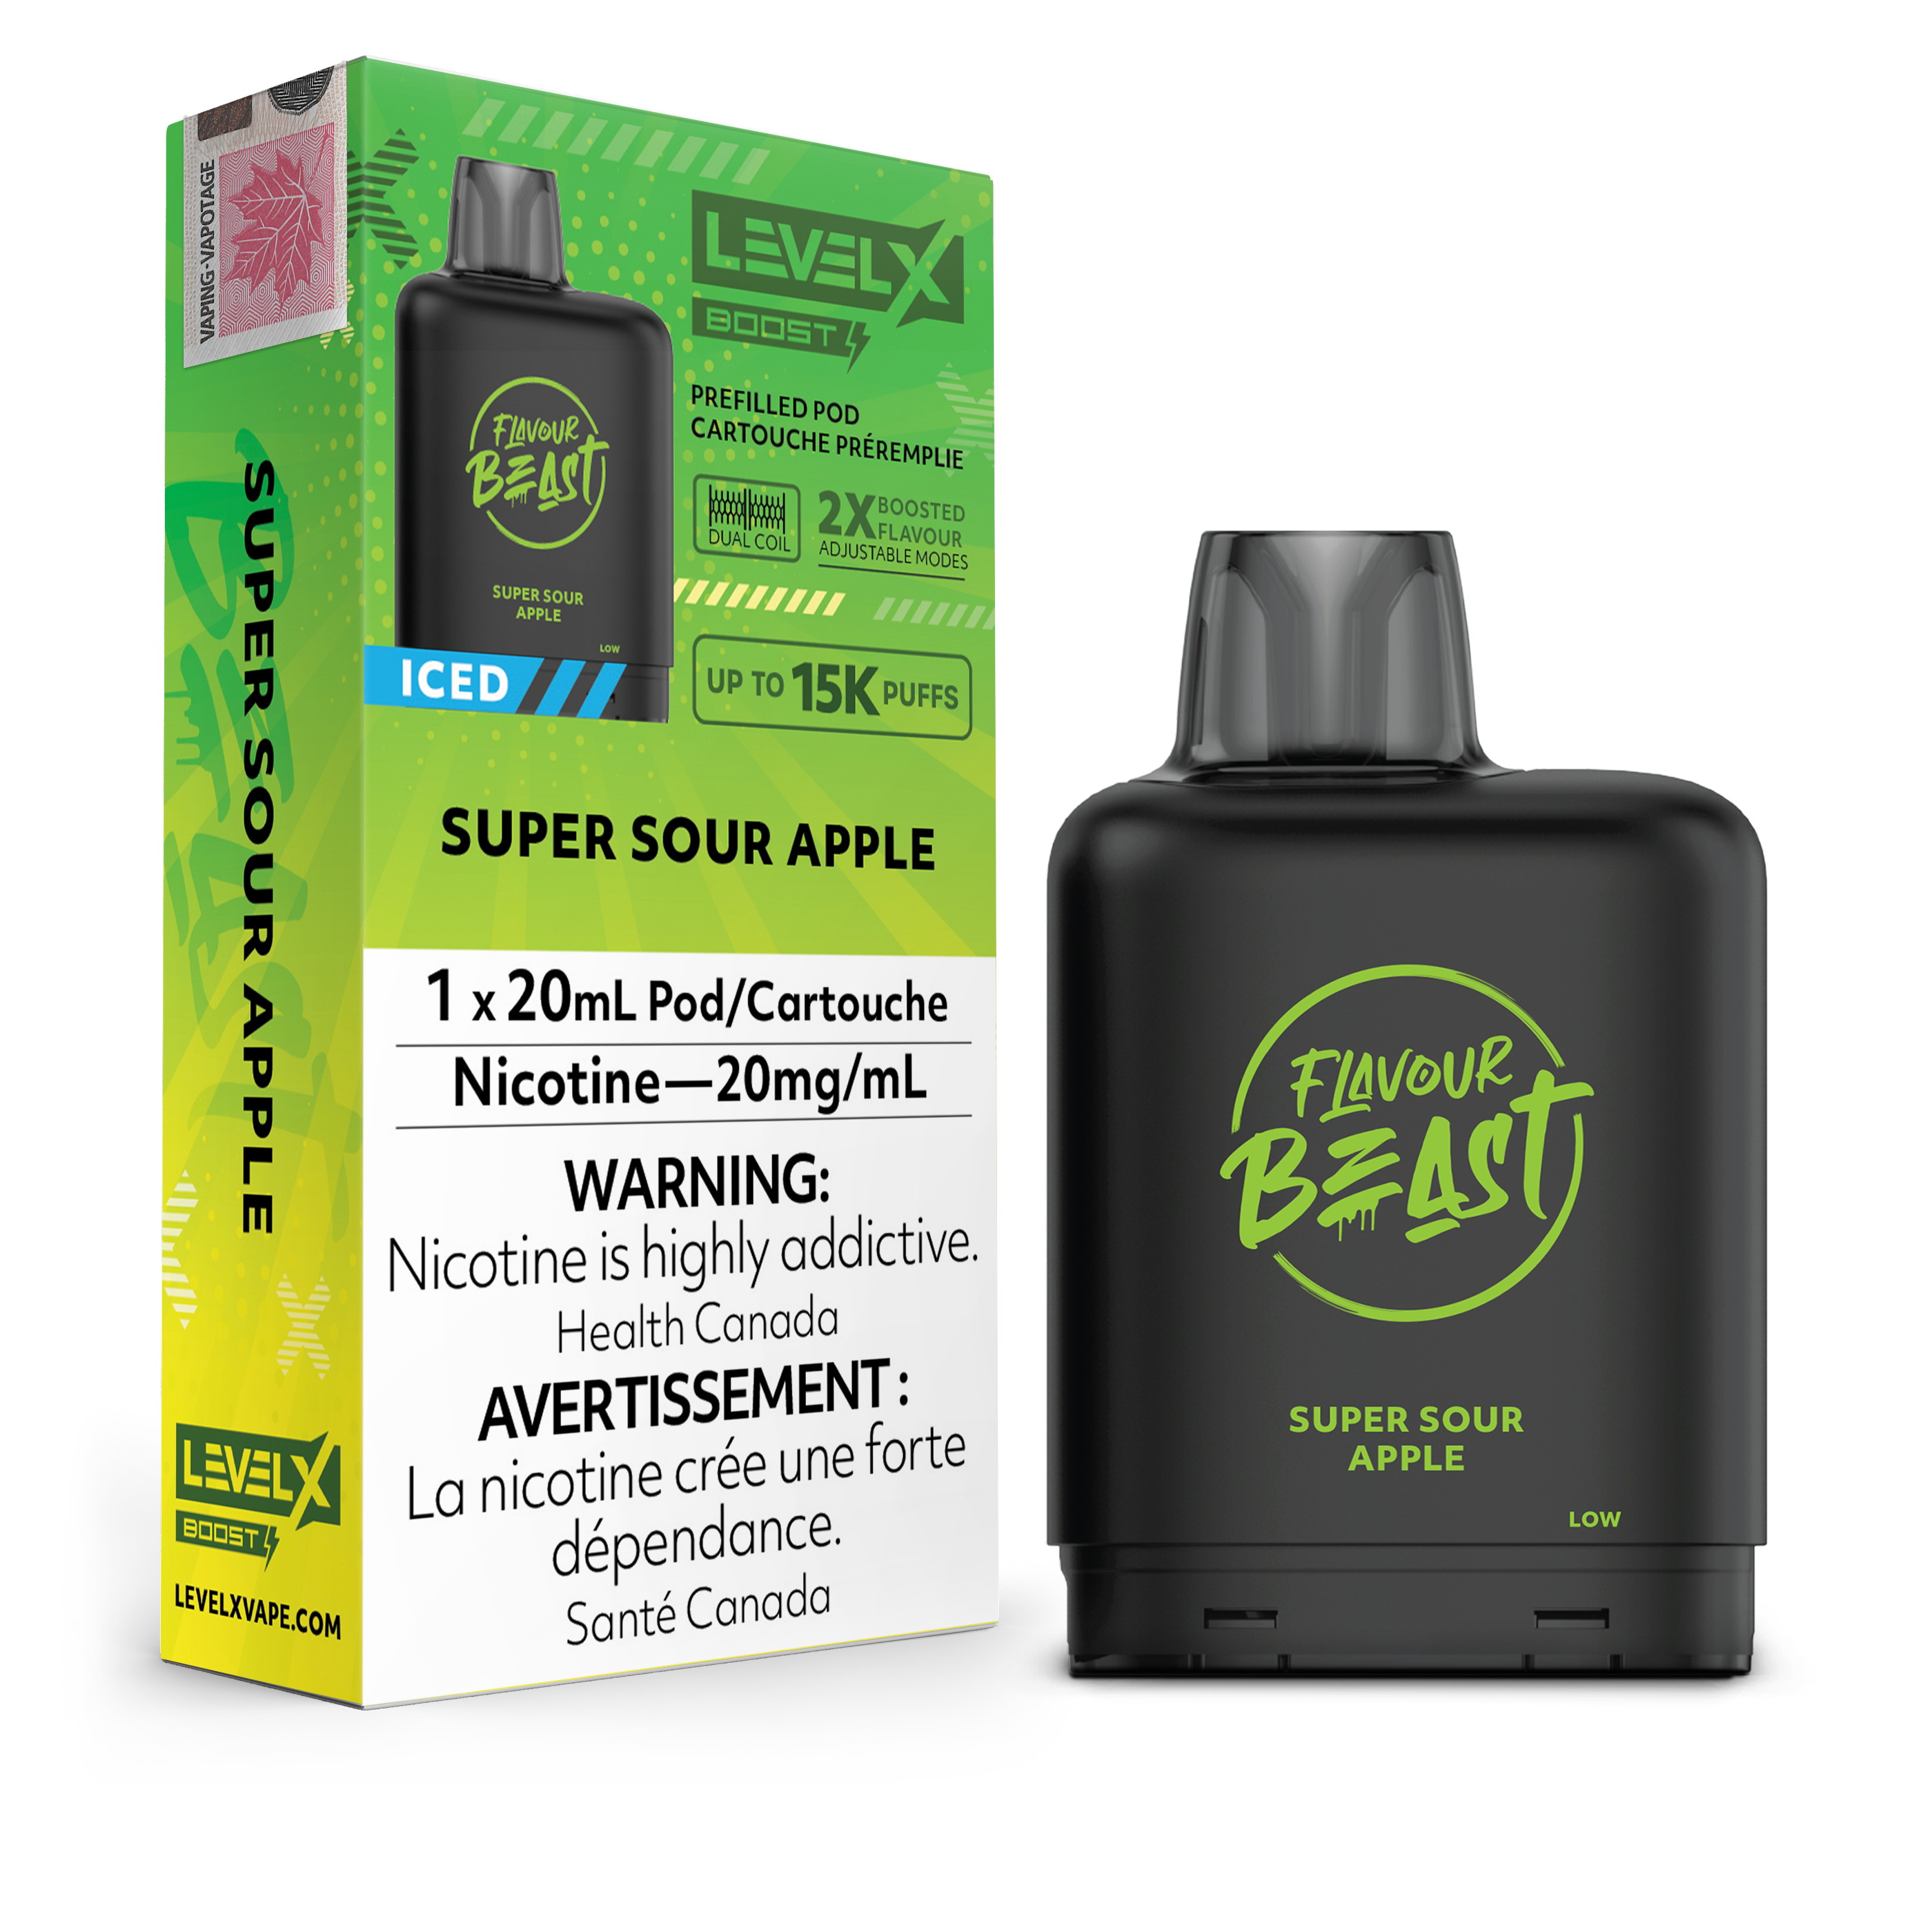 LEVEL X BOOST FLAVOUR BEAST Super Sour Apple 20MG